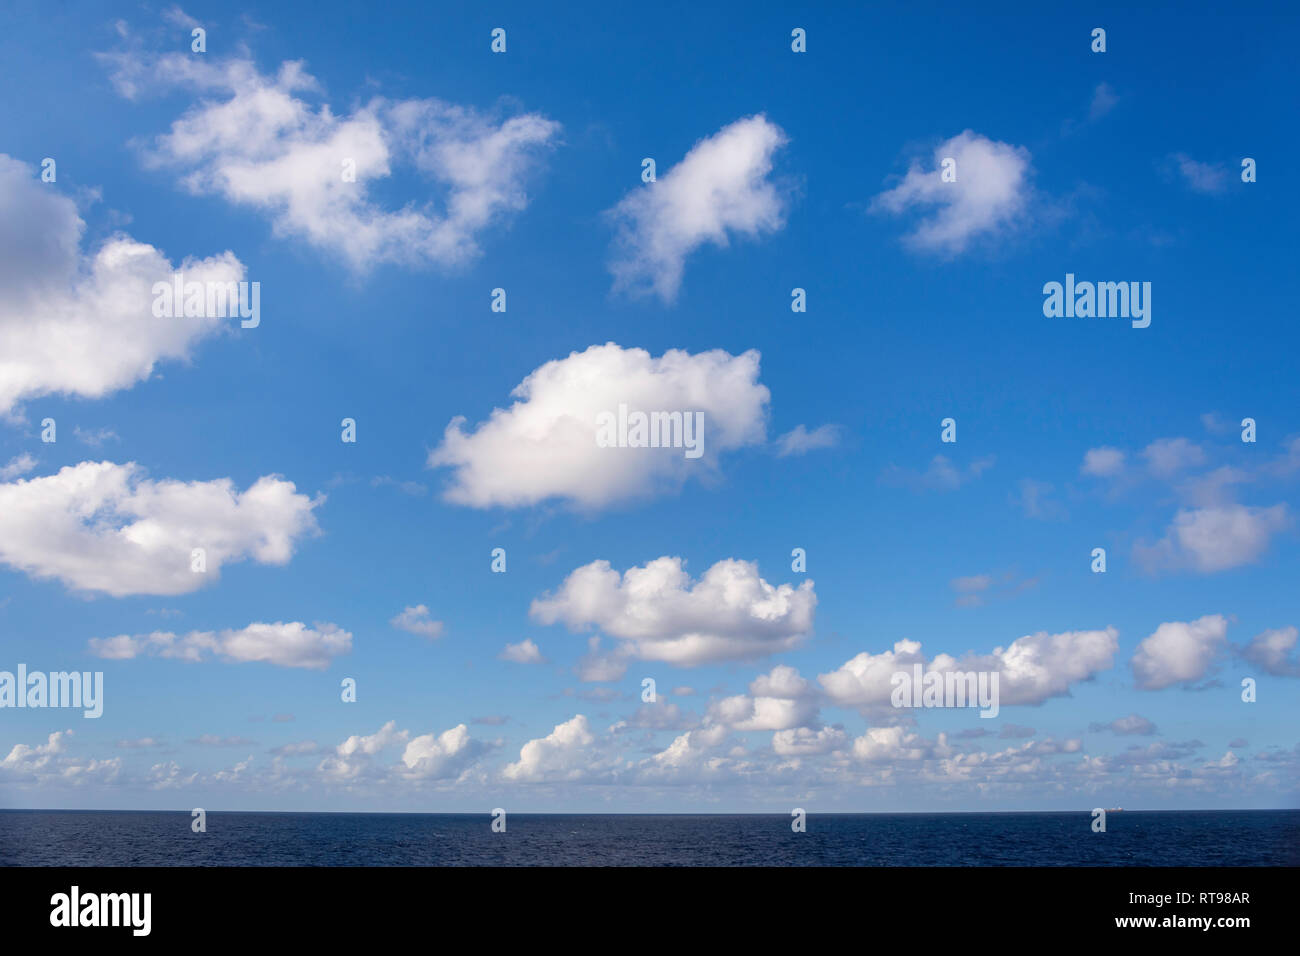 View of sea, sky and clouds from deck of P&O Britannia cruise ship, Leeward Antilles, Caribbean Sea Stock Photo